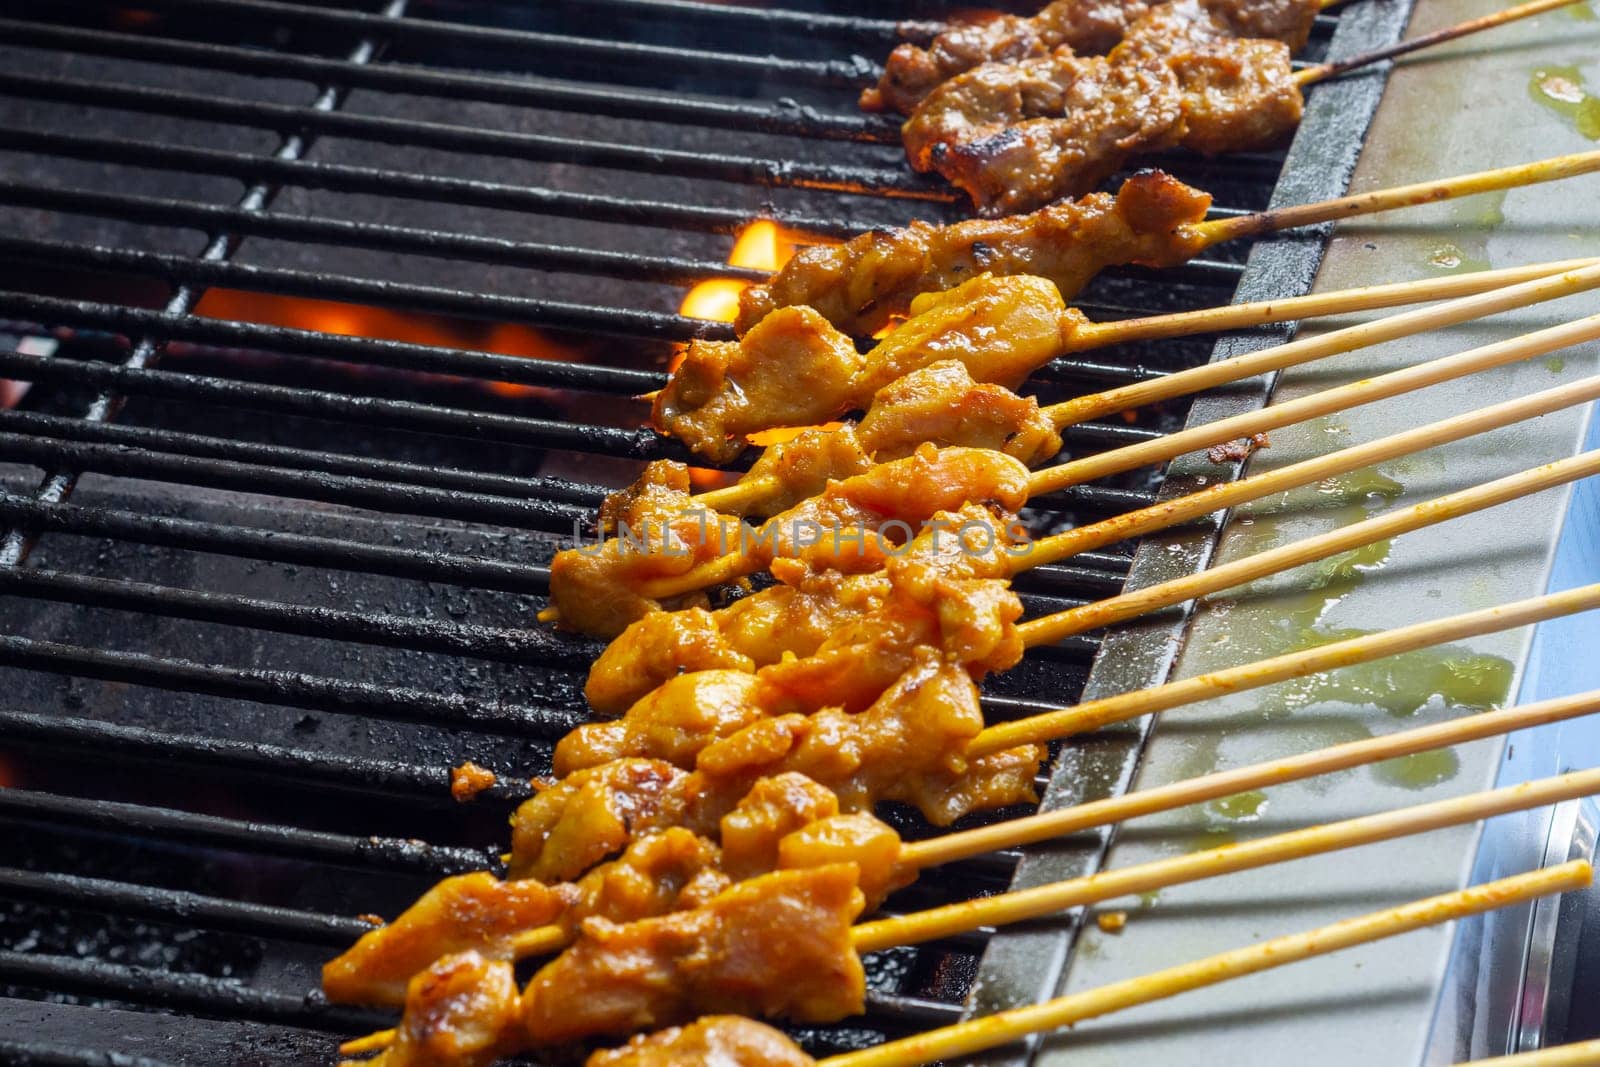 Asian cuisine, Malaysia chicken satay cooking on a hot charcoal grill. by JennMiranda